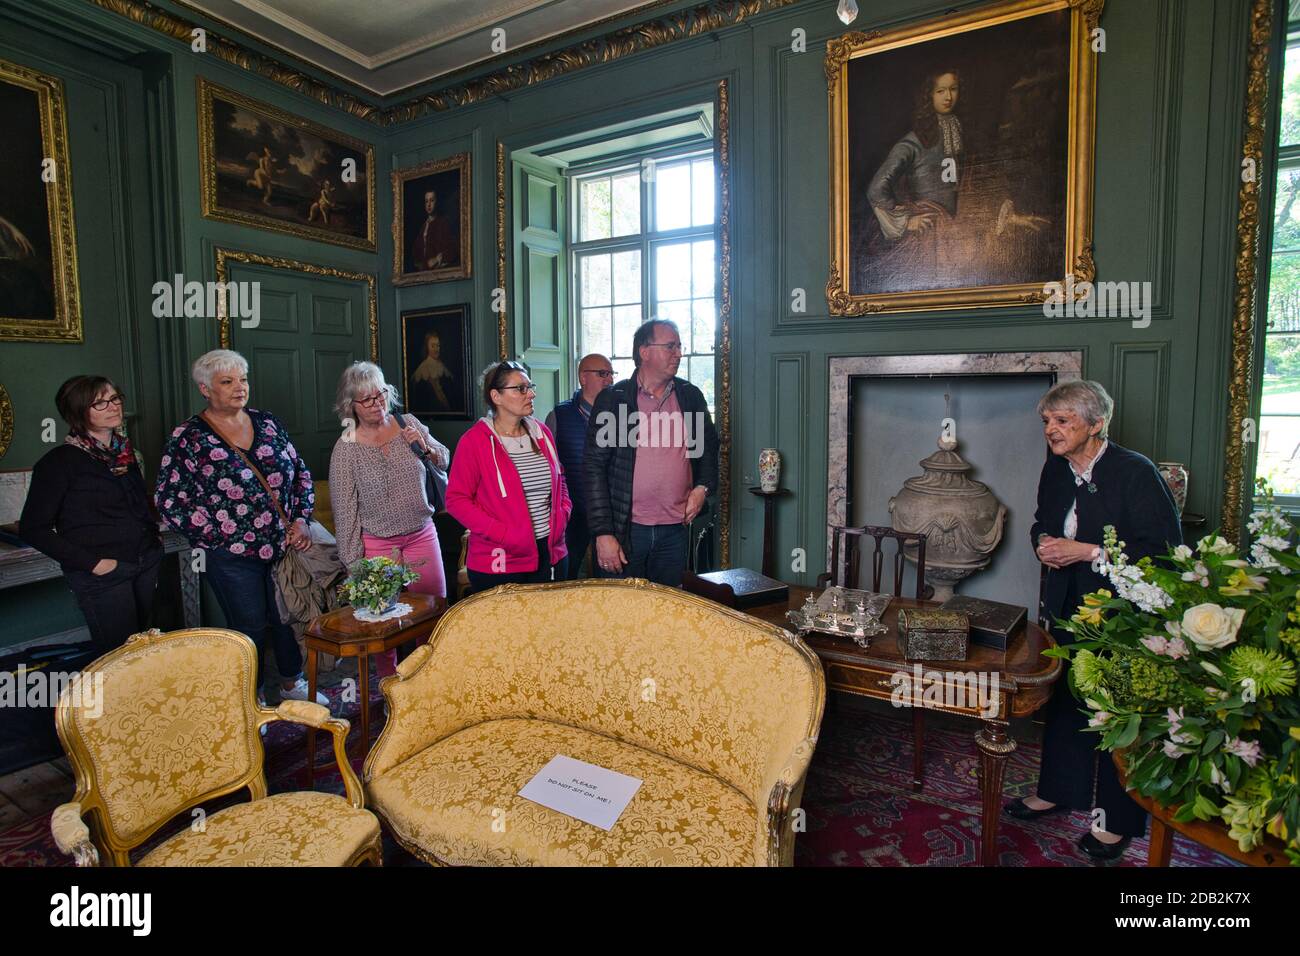 GREAT BRITAIN / England /Cornwall / Padstow / Tourists visisting the Prideaux Place . Stock Photo